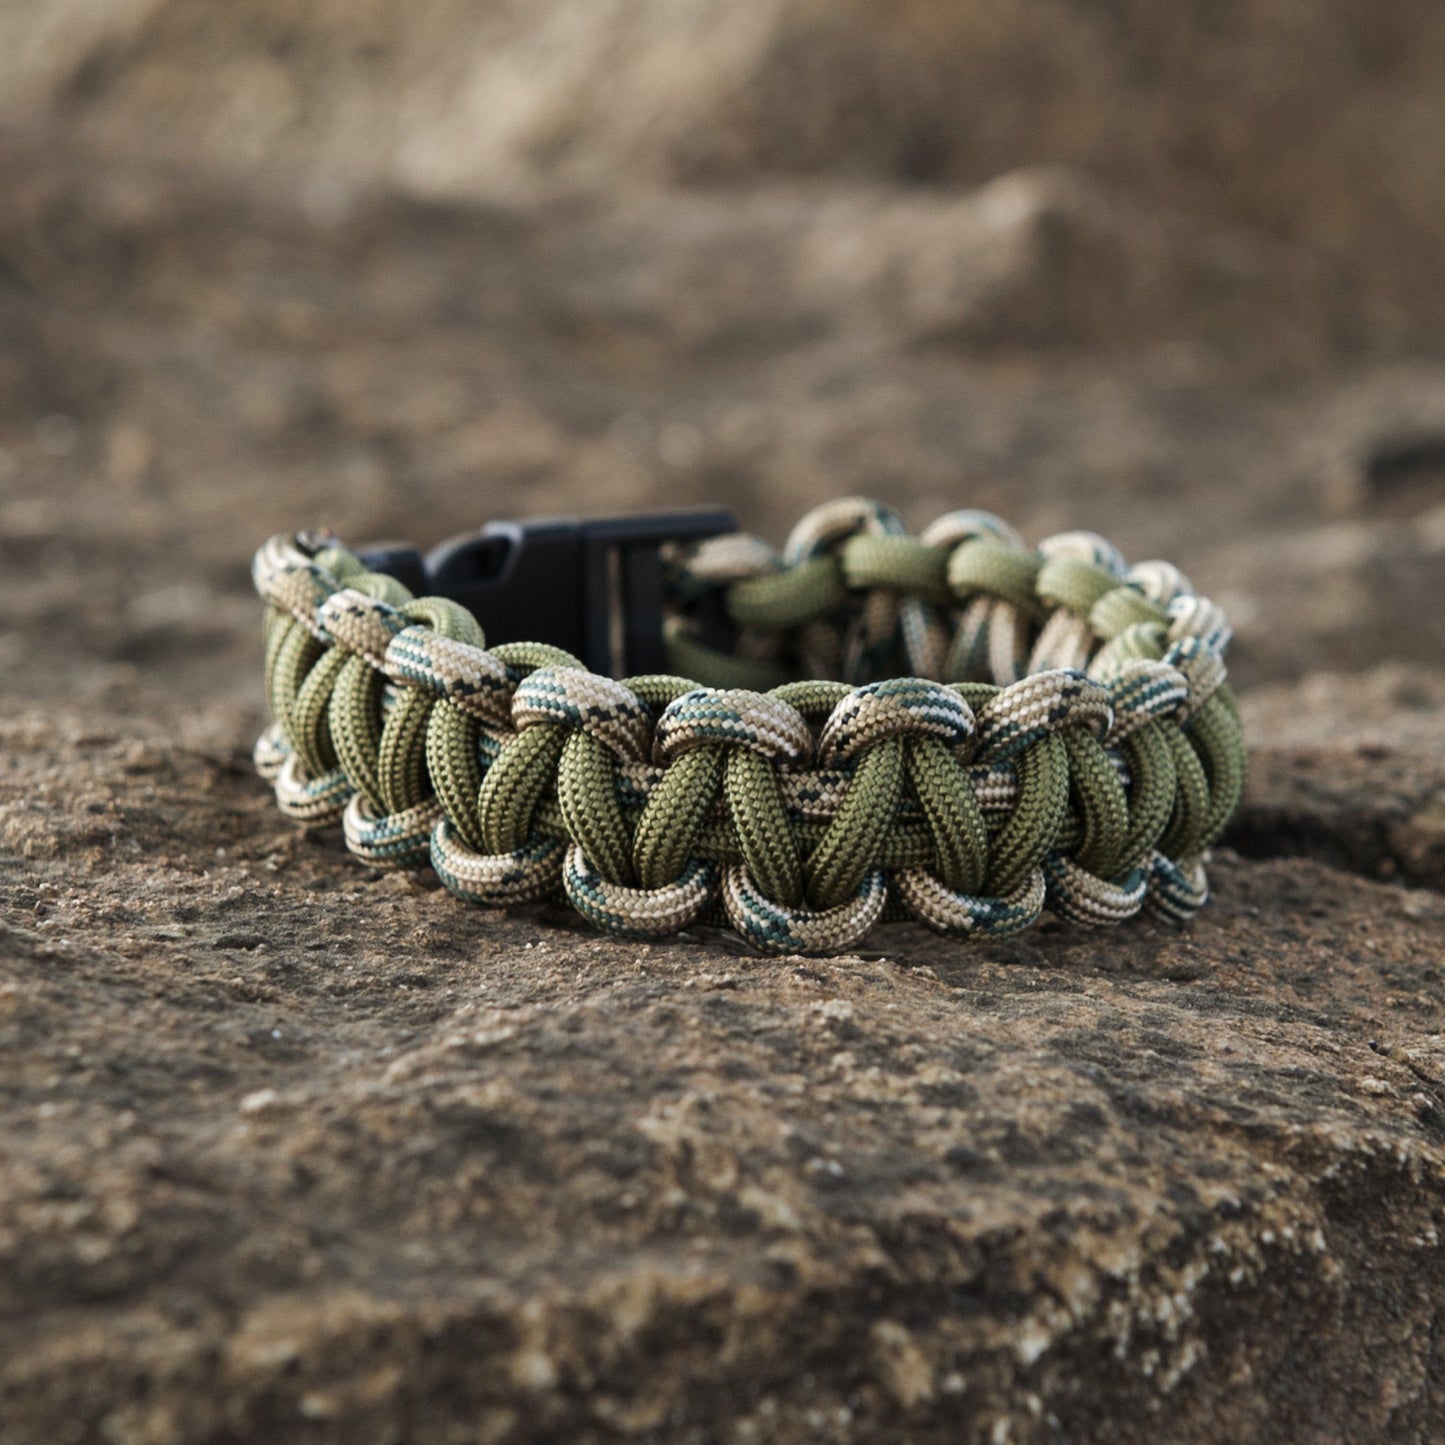 Close-up of forest green SurvivorCord showcasing the intertwined fibers in a wristband construction